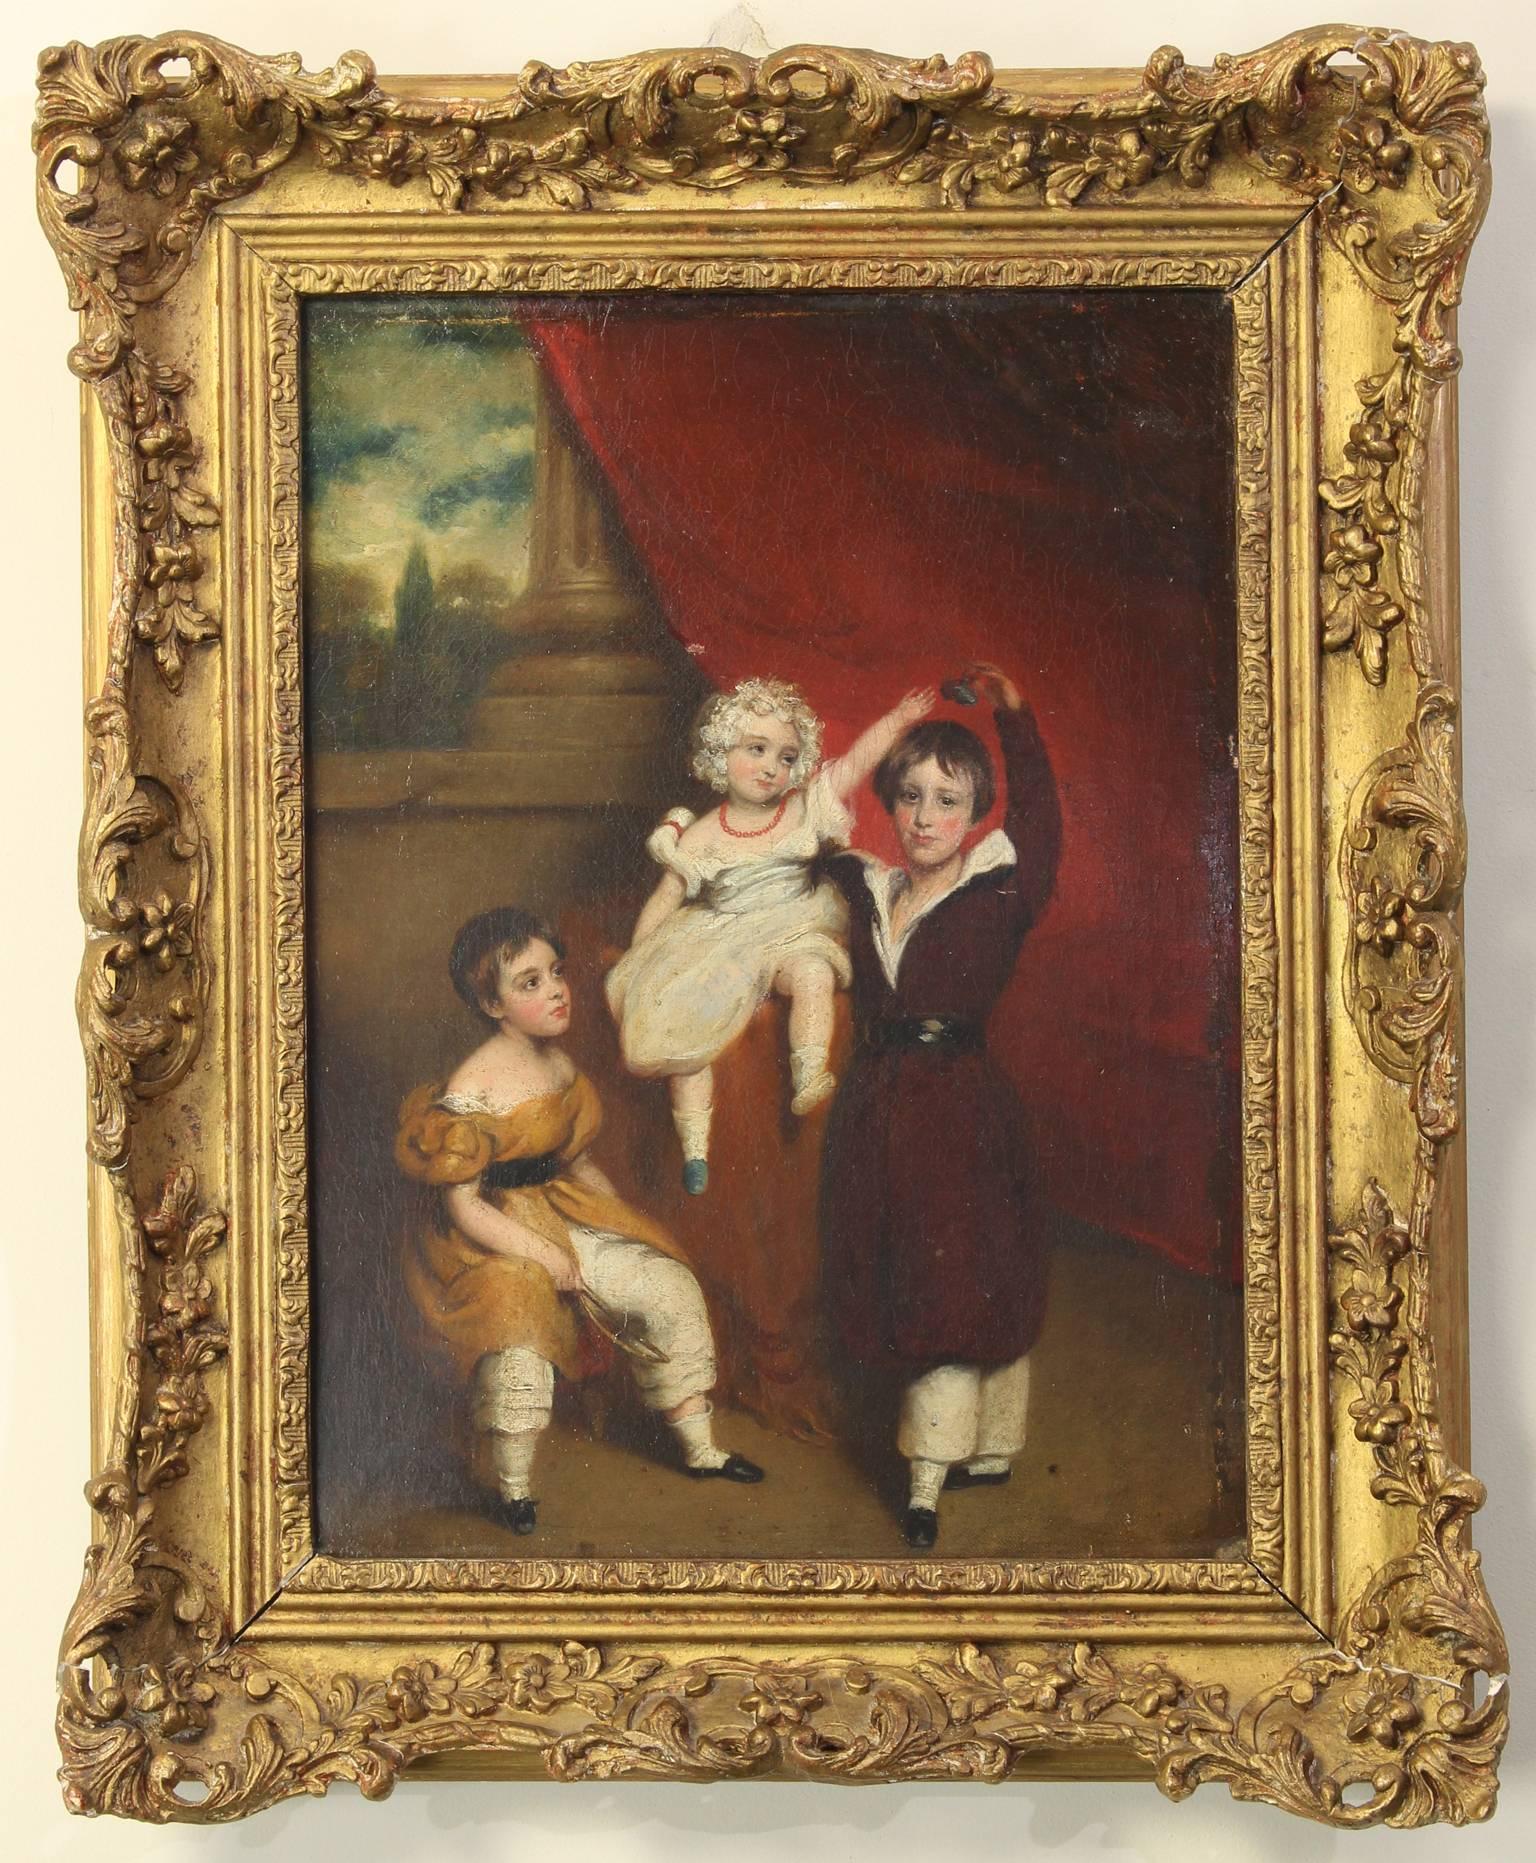 An early 19th century English oil on canvas group portrait of three siblings in a draped landscape setting with original giltwood frame.